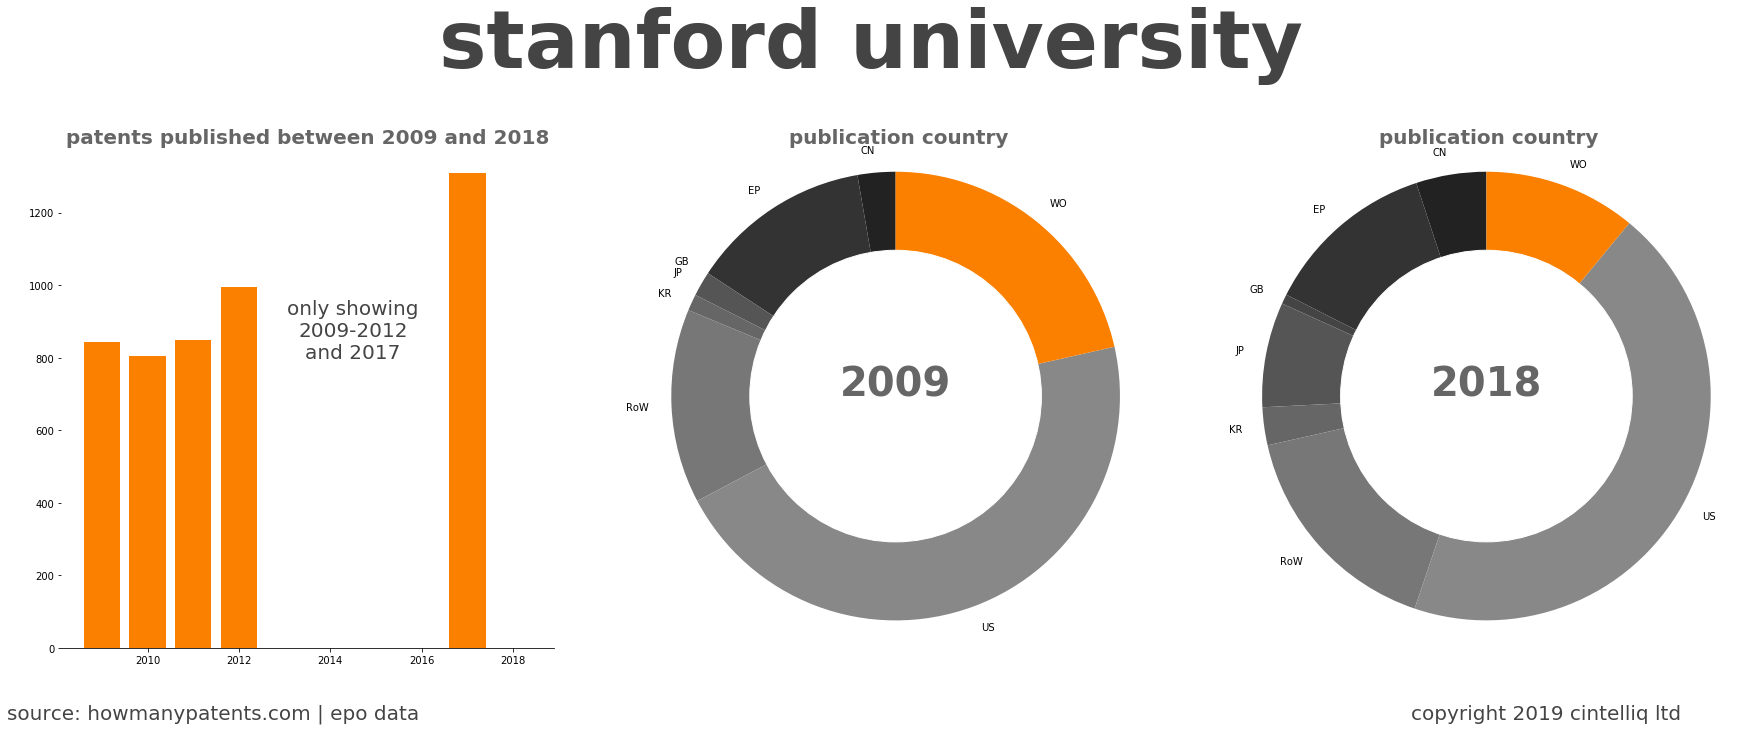 summary of patents for Stanford University